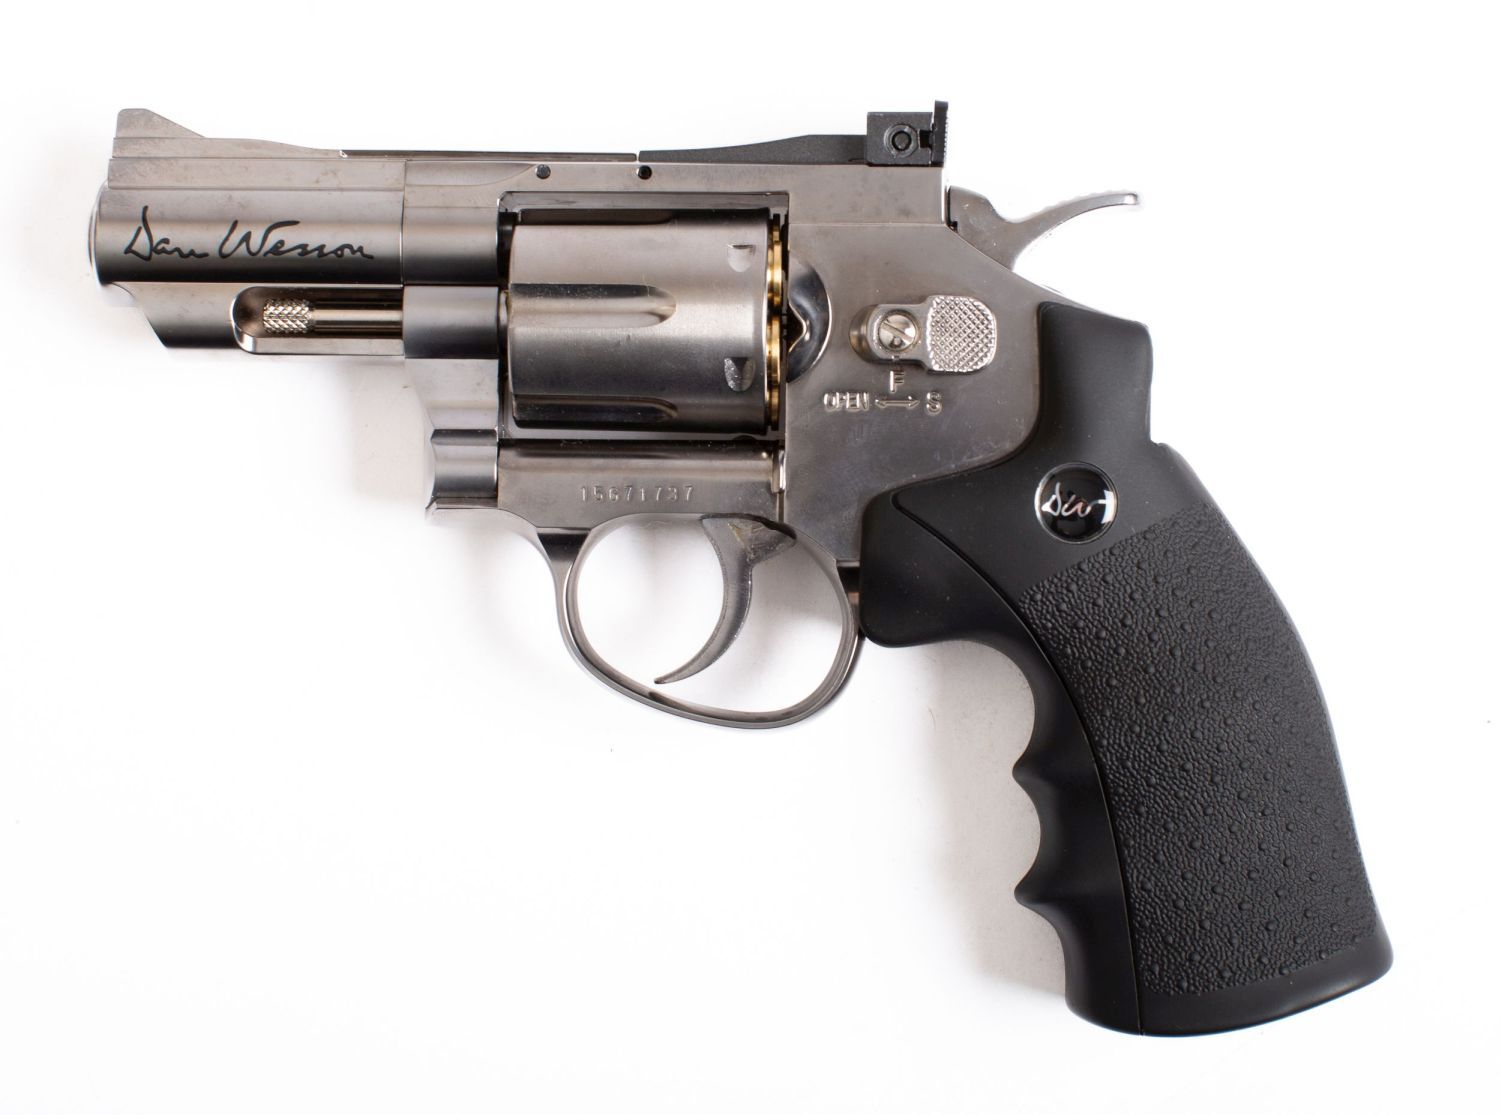 A Dan Wesson .177 calibre CO2 air pistol revolver, serial number '156G71727' 3 inch barrel with .